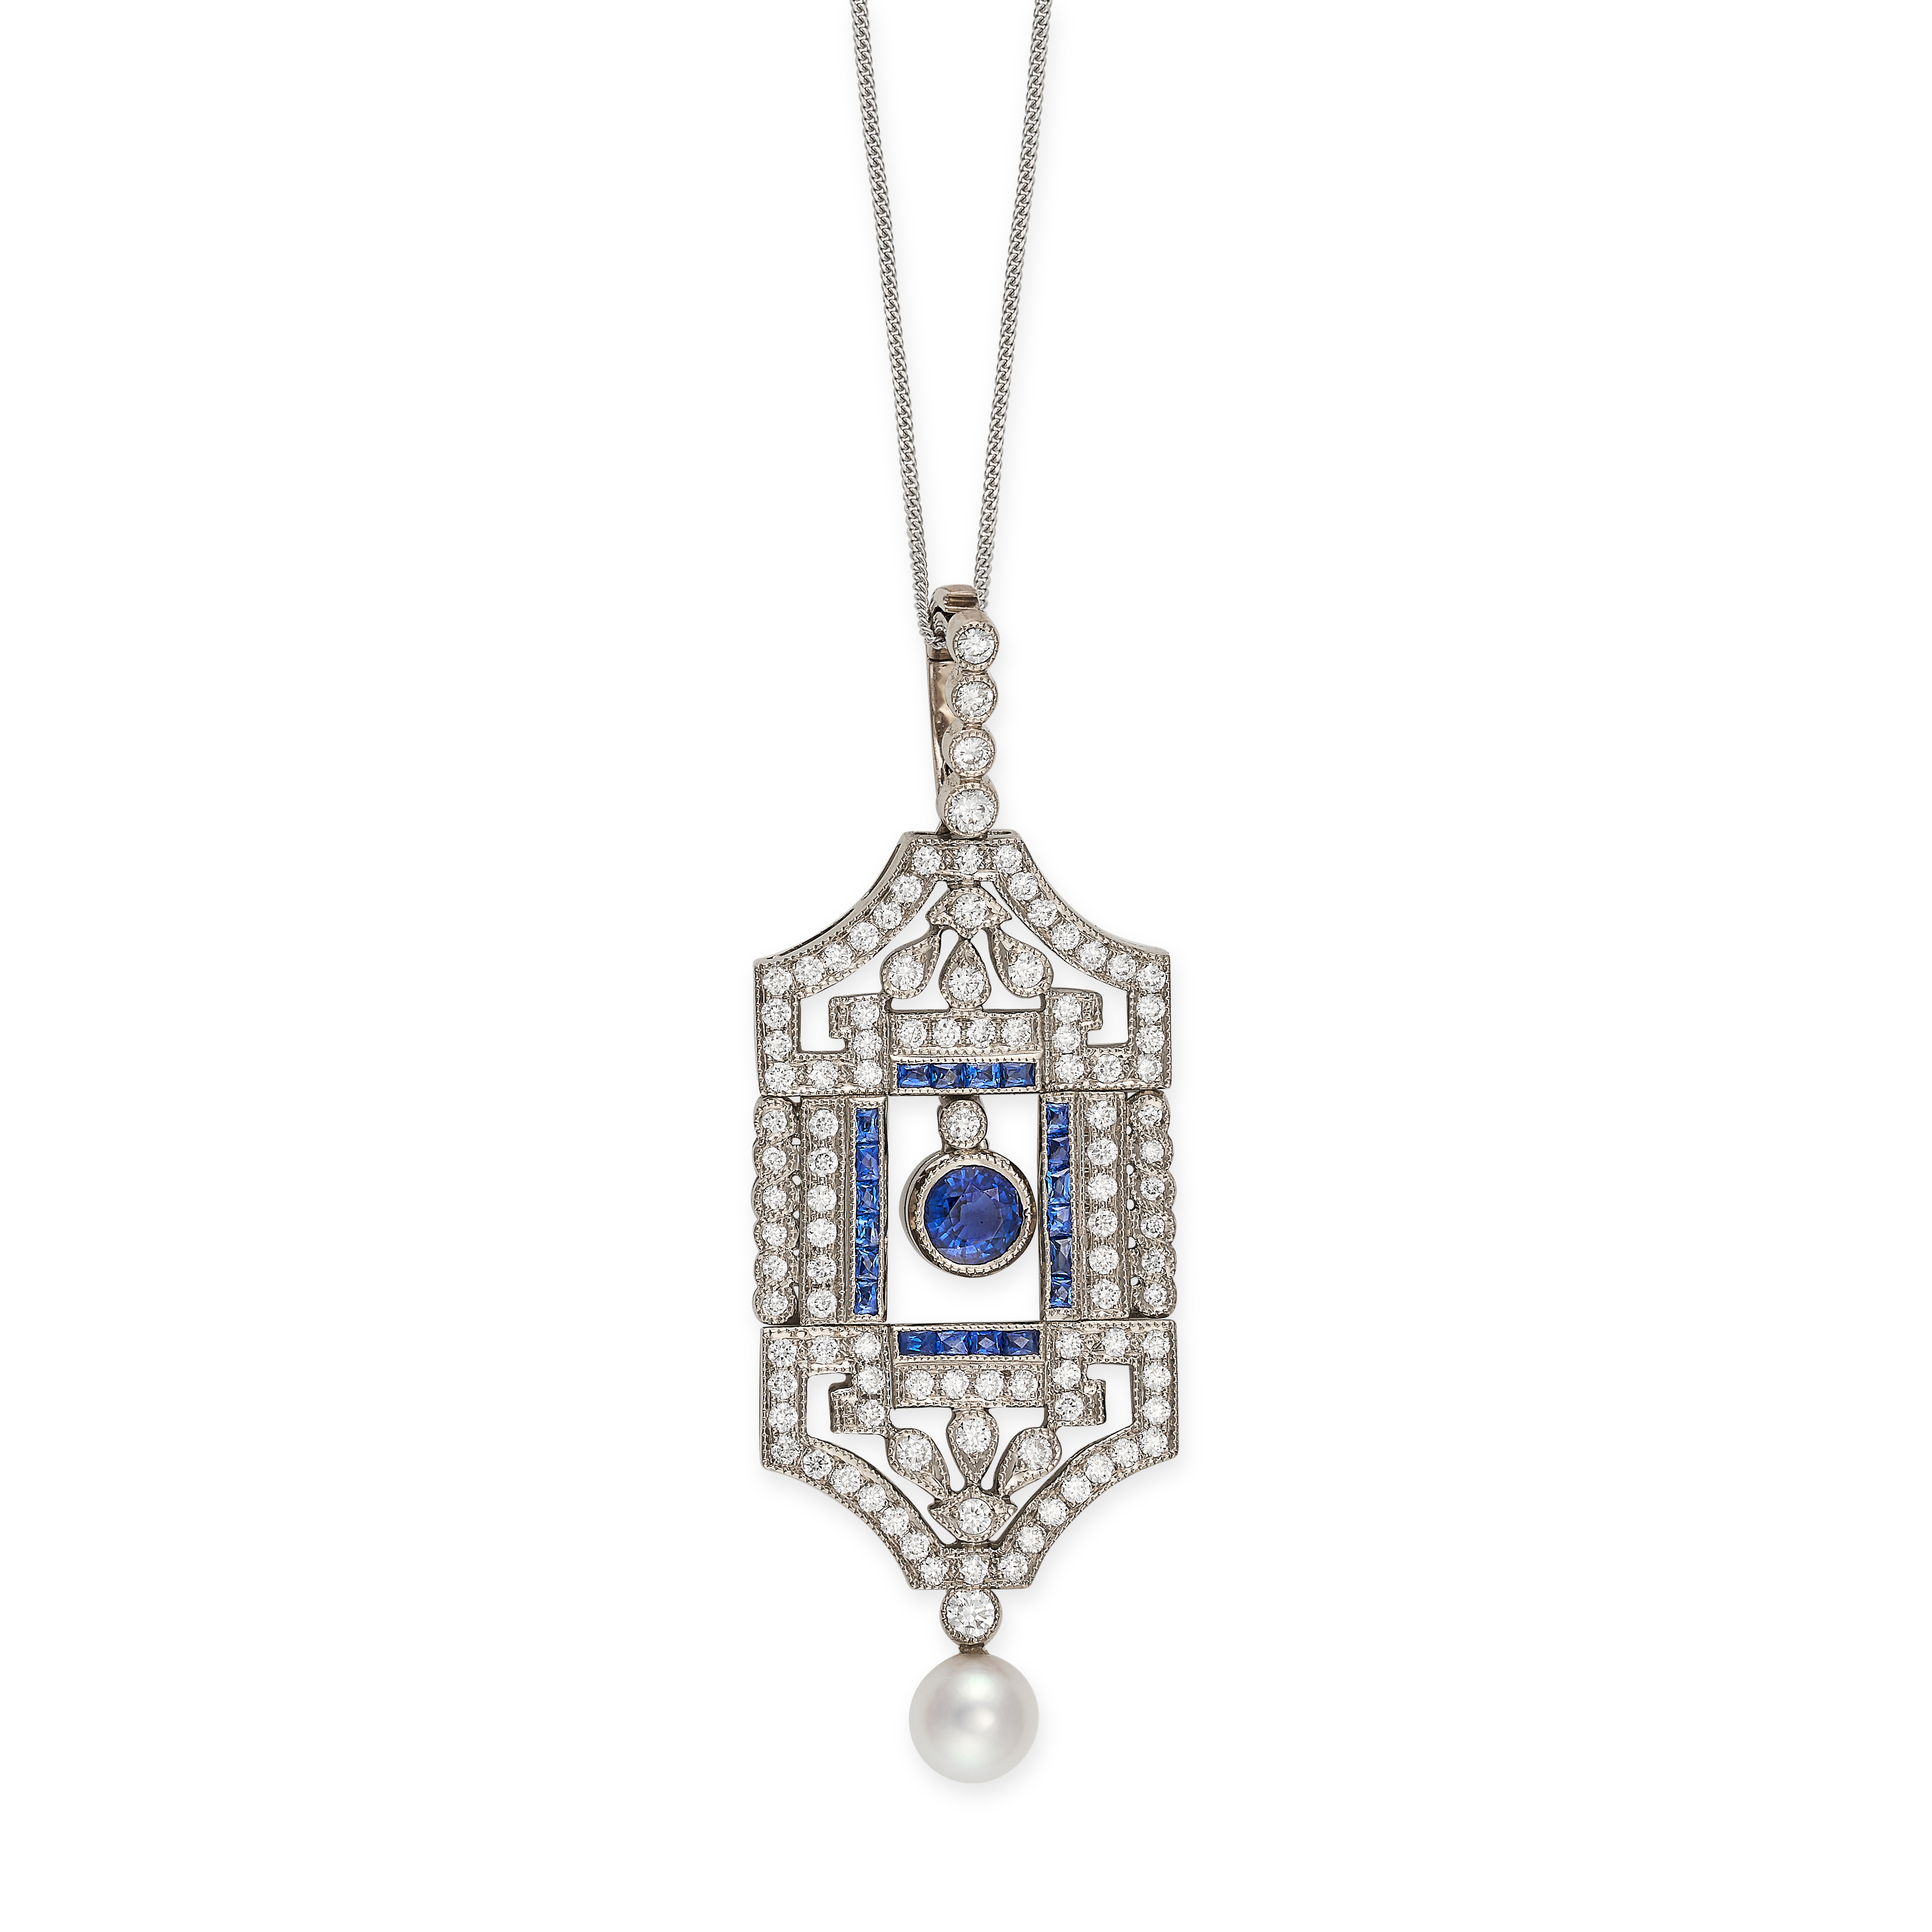 A SAPPHIRE, DIAMOND AND PEARL PENDANT NECKLACE in 18ct white gold, the geometric openwork pendant